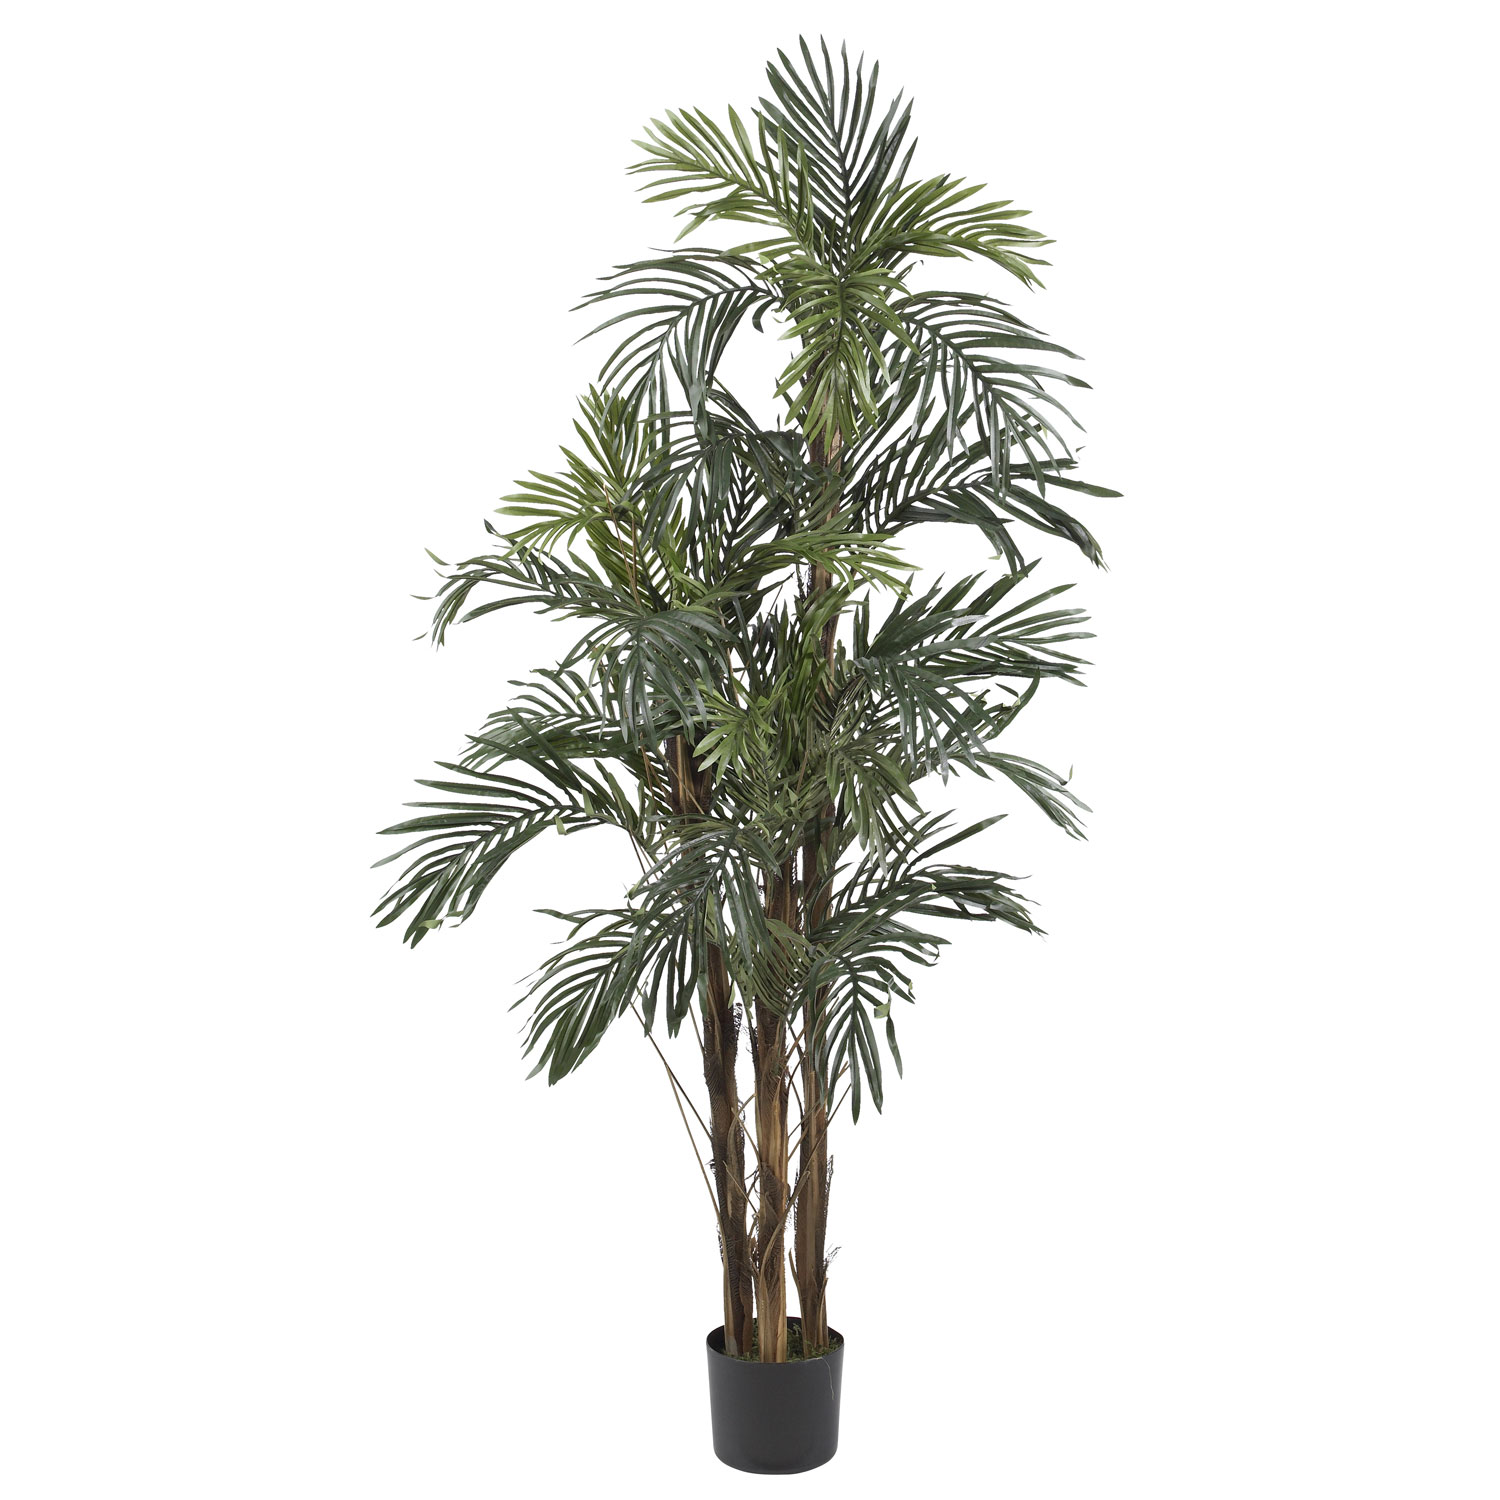 5 Foot Robellini Palm Tree: Potted